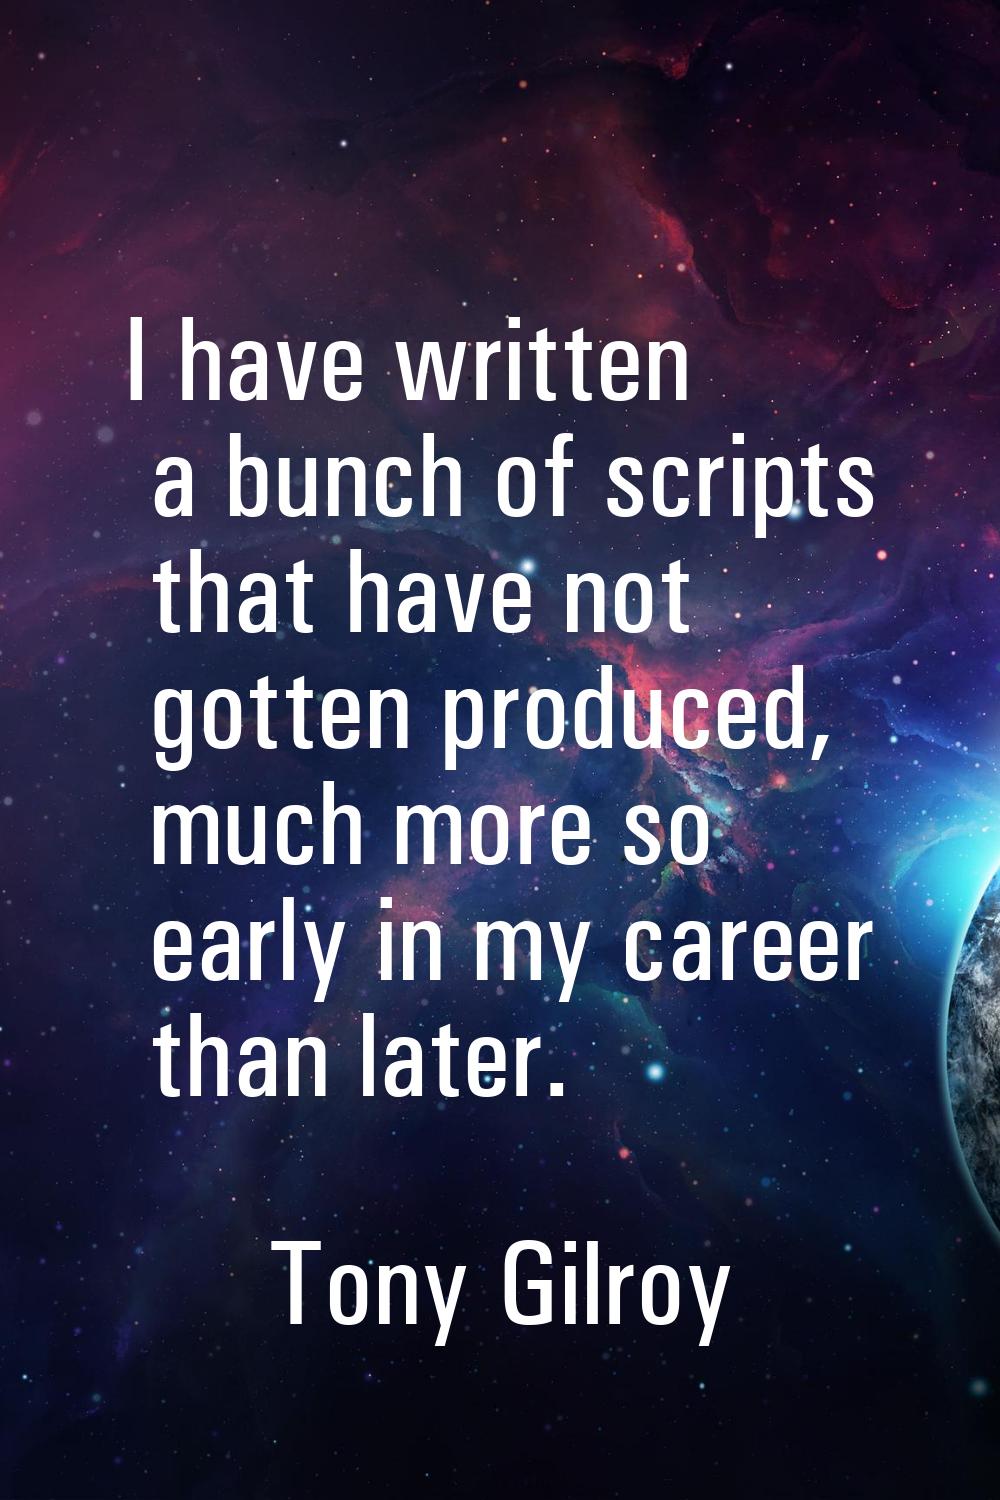 I have written a bunch of scripts that have not gotten produced, much more so early in my career th